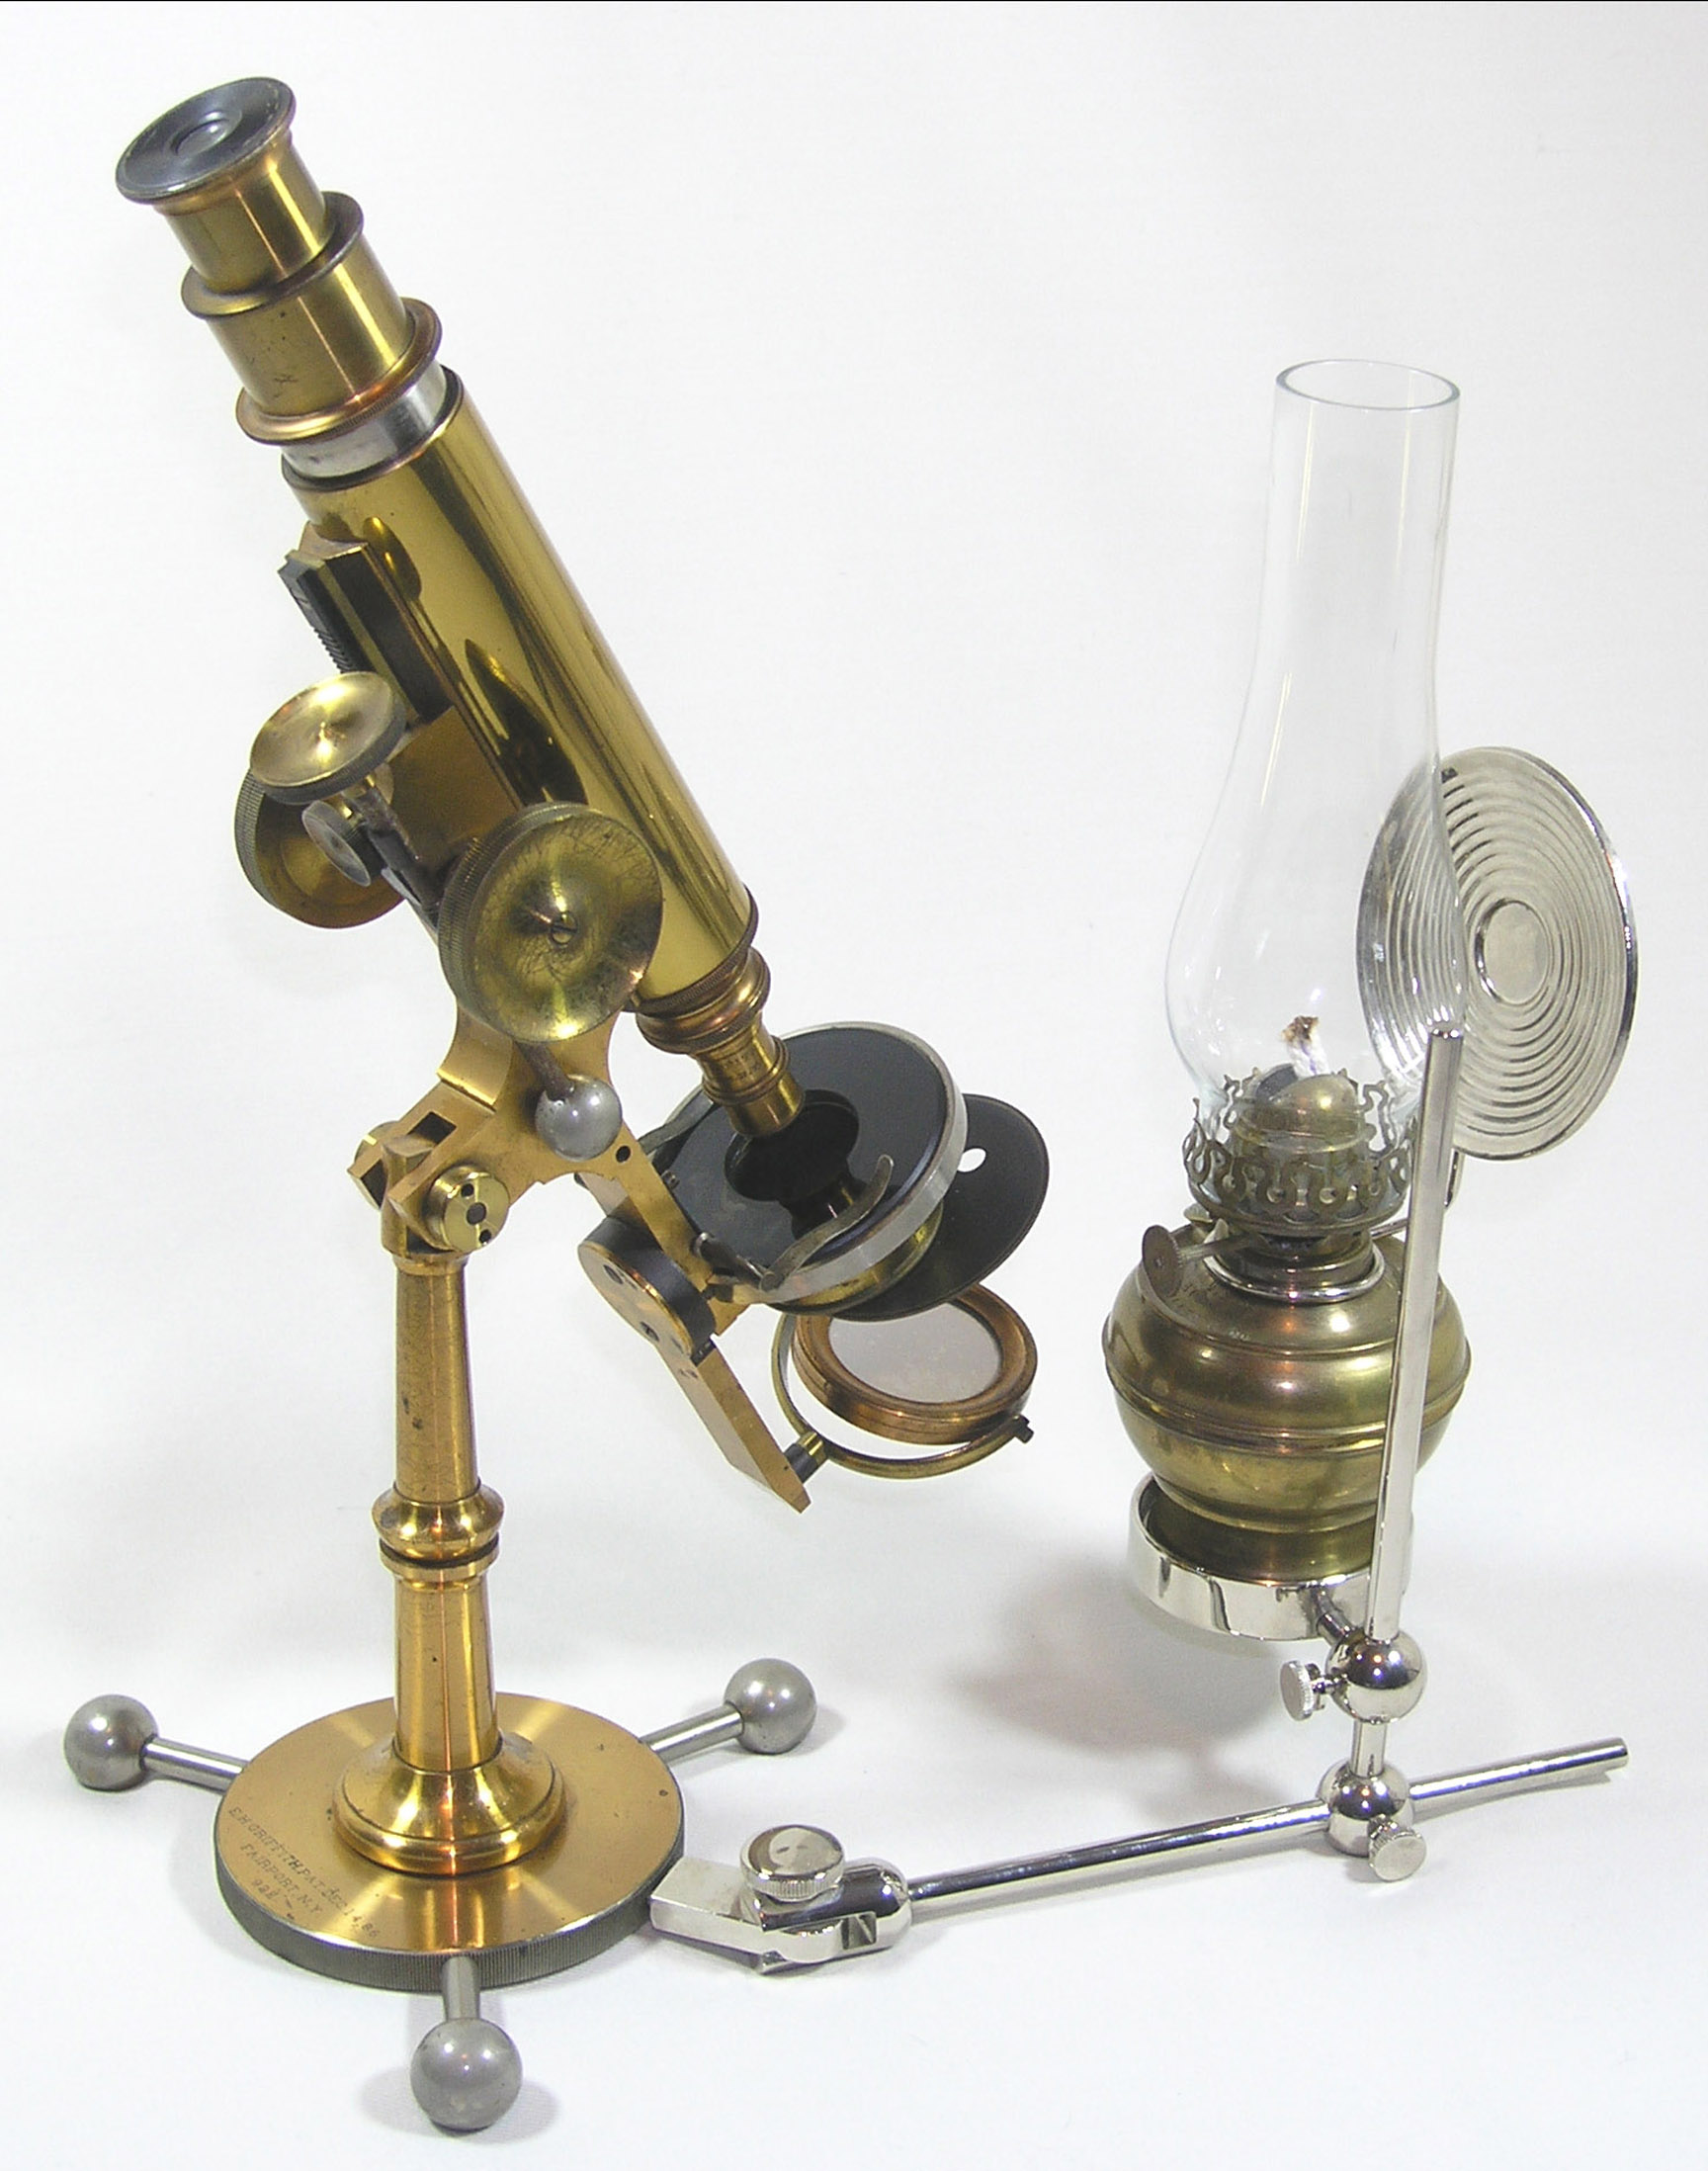 Improved Griffith Club microscope with original lamp